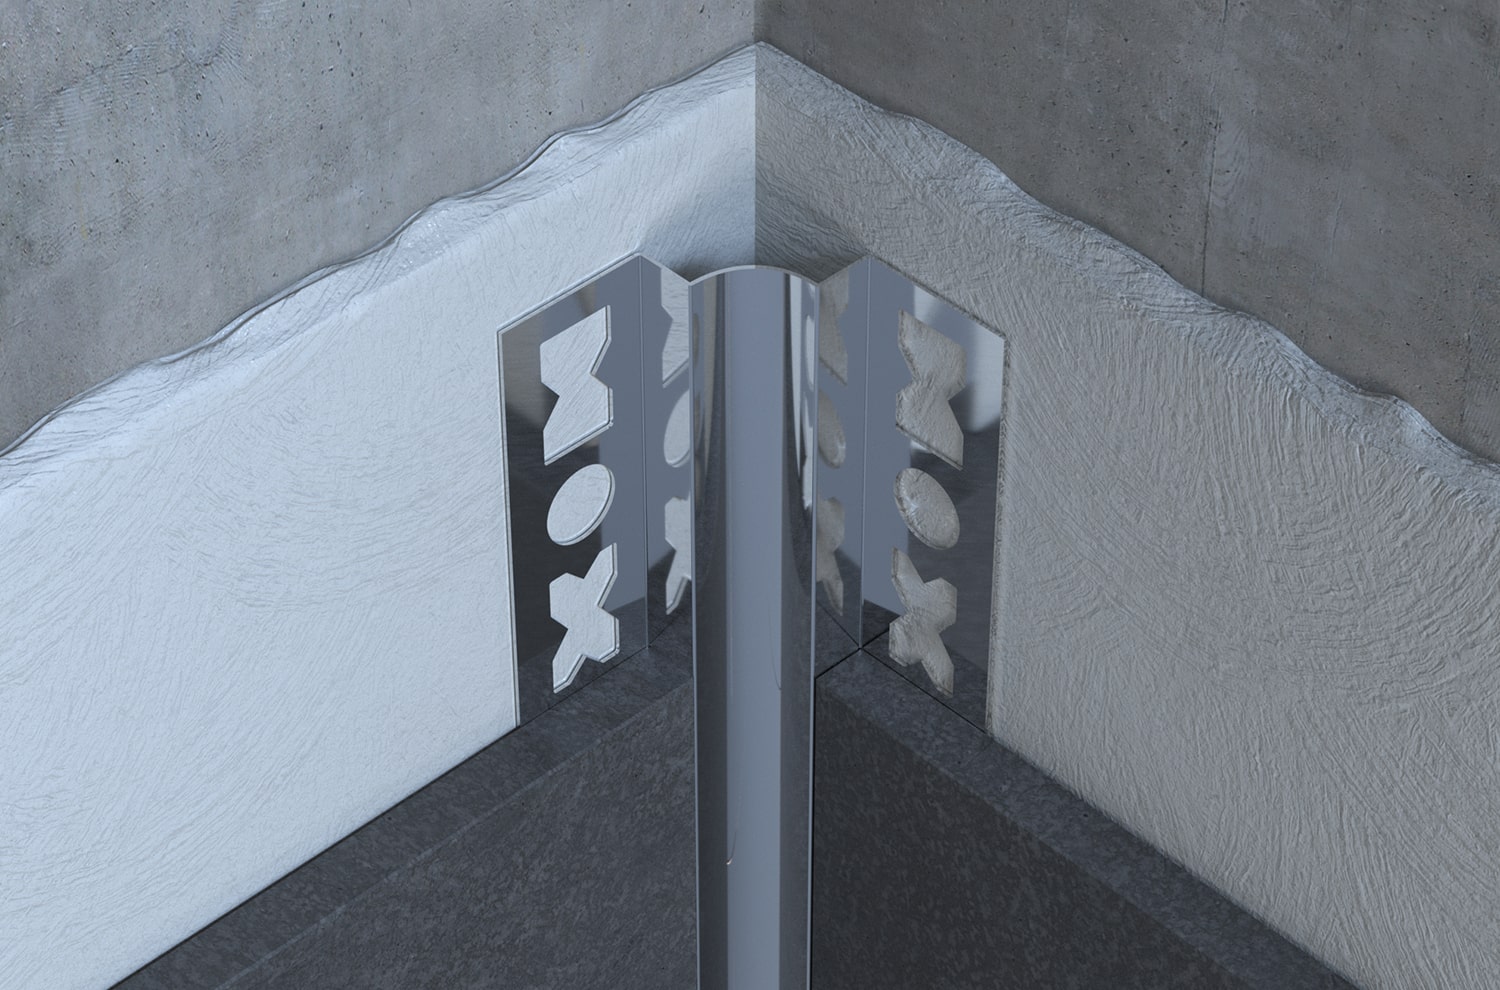 mps-s stainless steel border